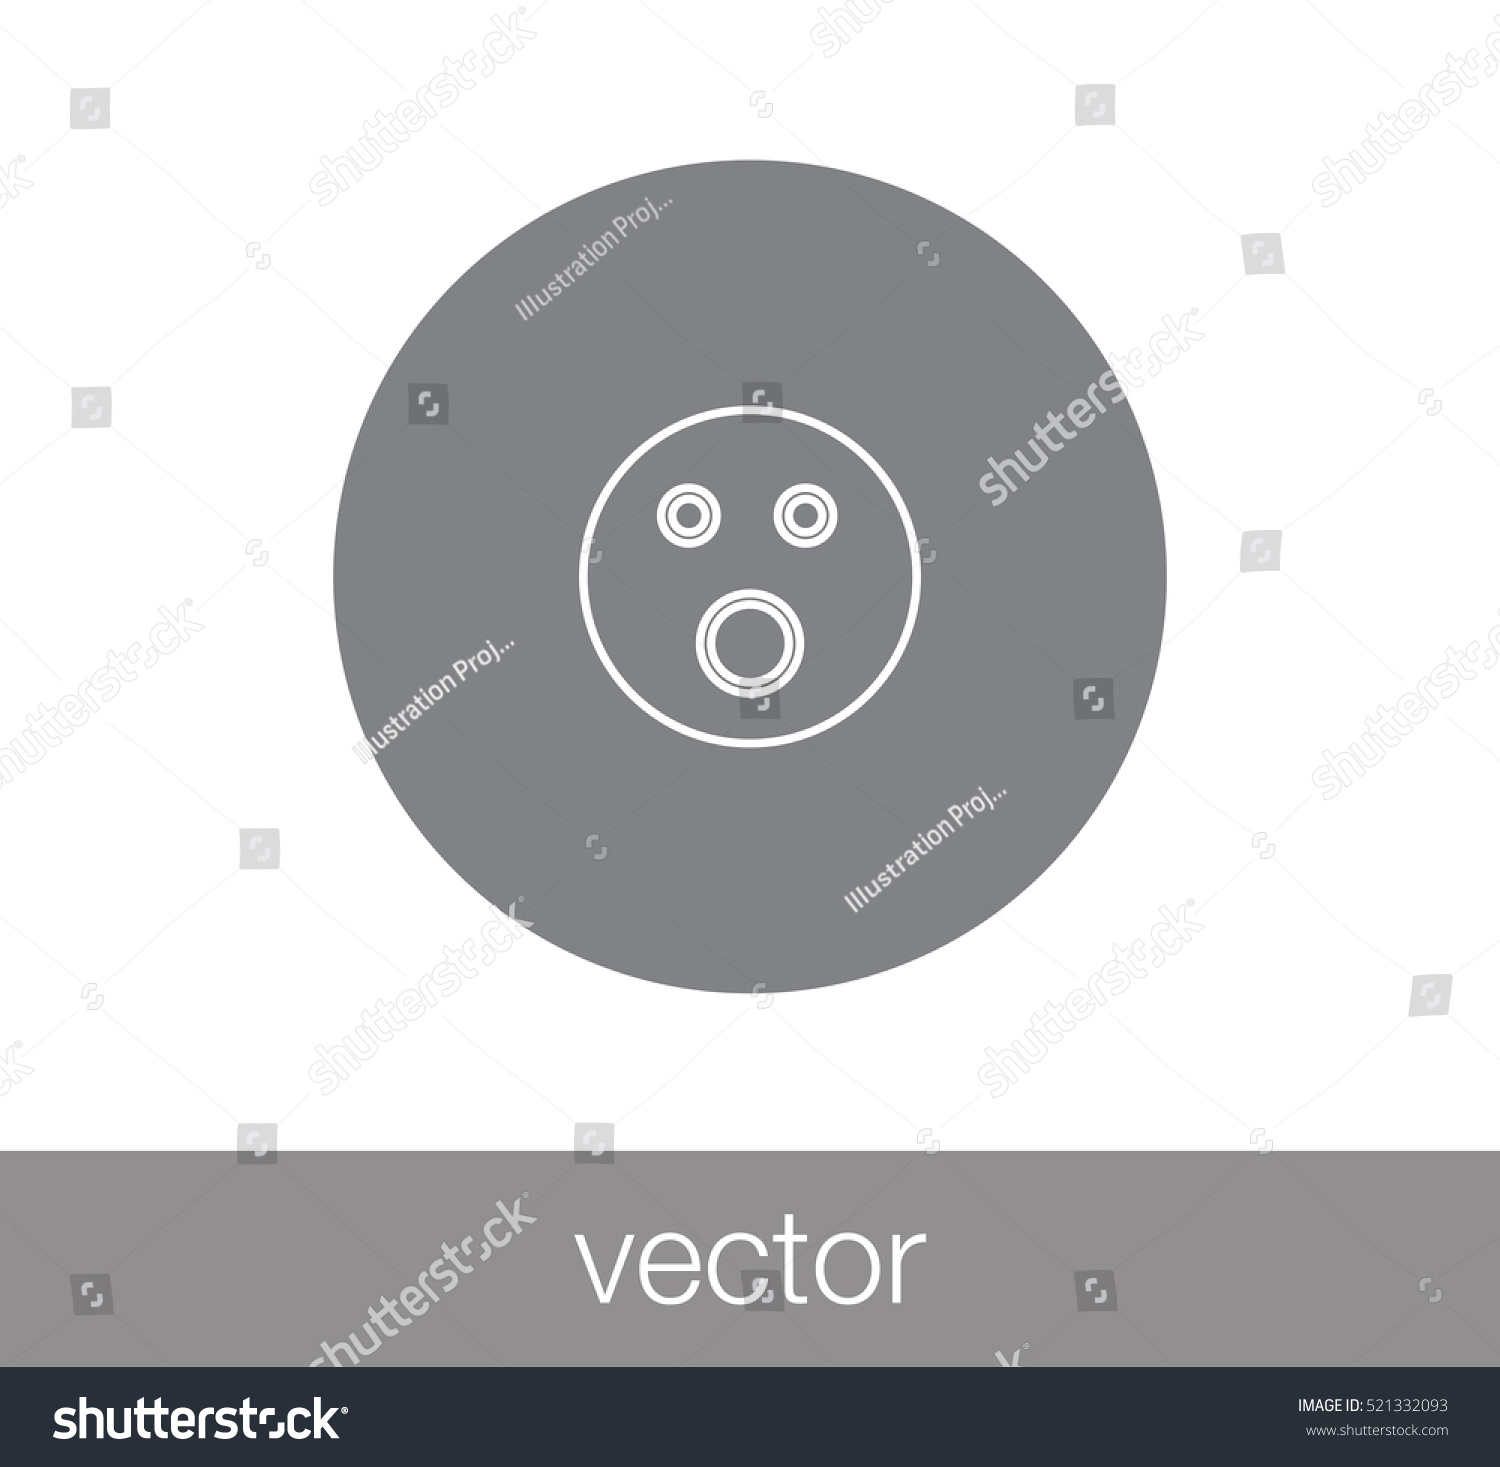 Laughing Smiley Icon In Flat Style Isolated On White Background 